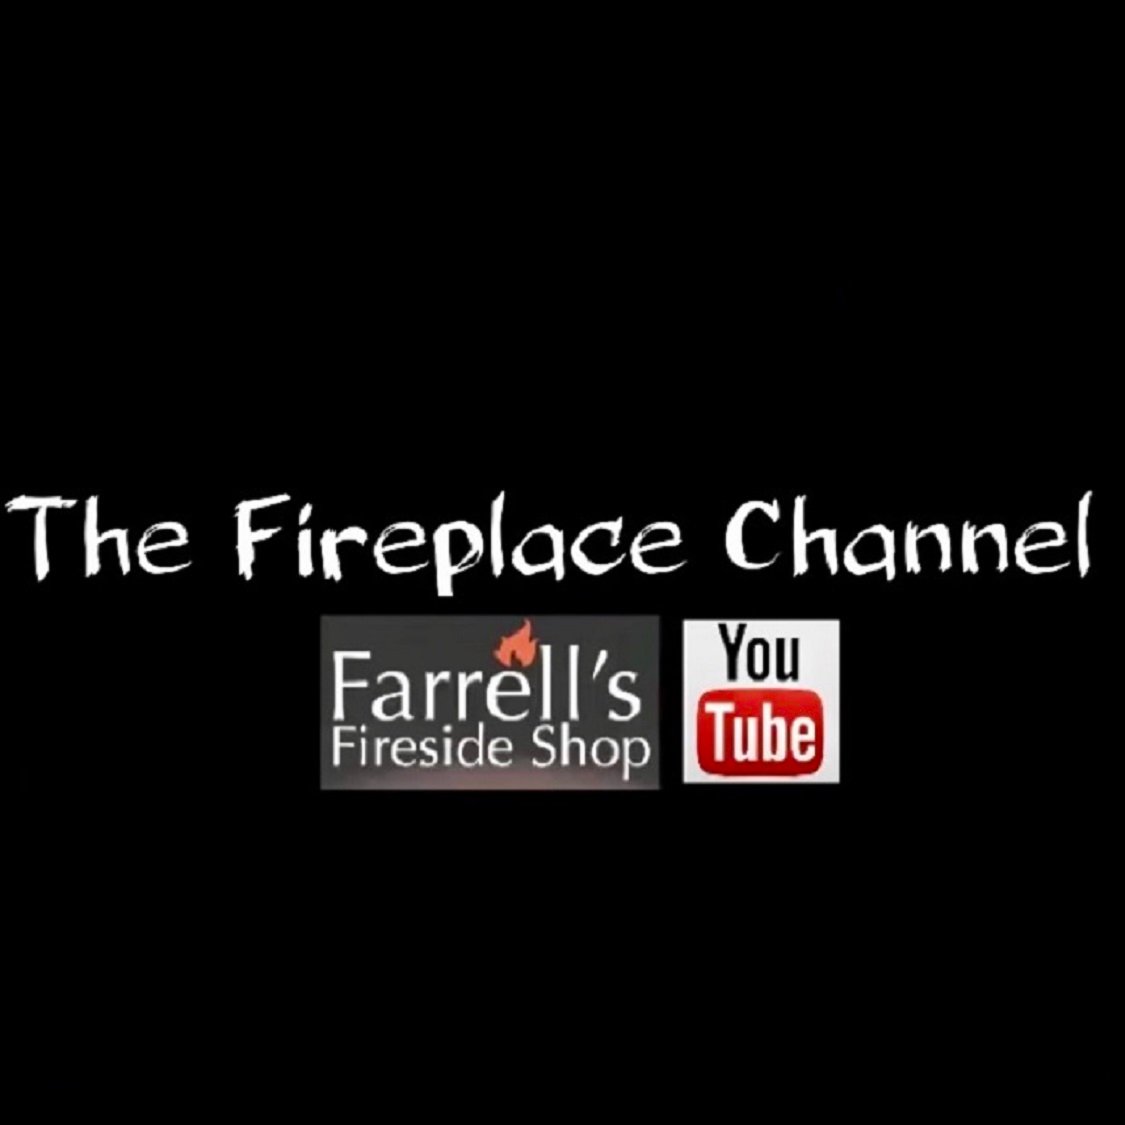 The Fireplace Channel in association with Farrell's Fireside. From Gas Logs, wood burning units, and pellet stoves we specialize in Fireplace Installation